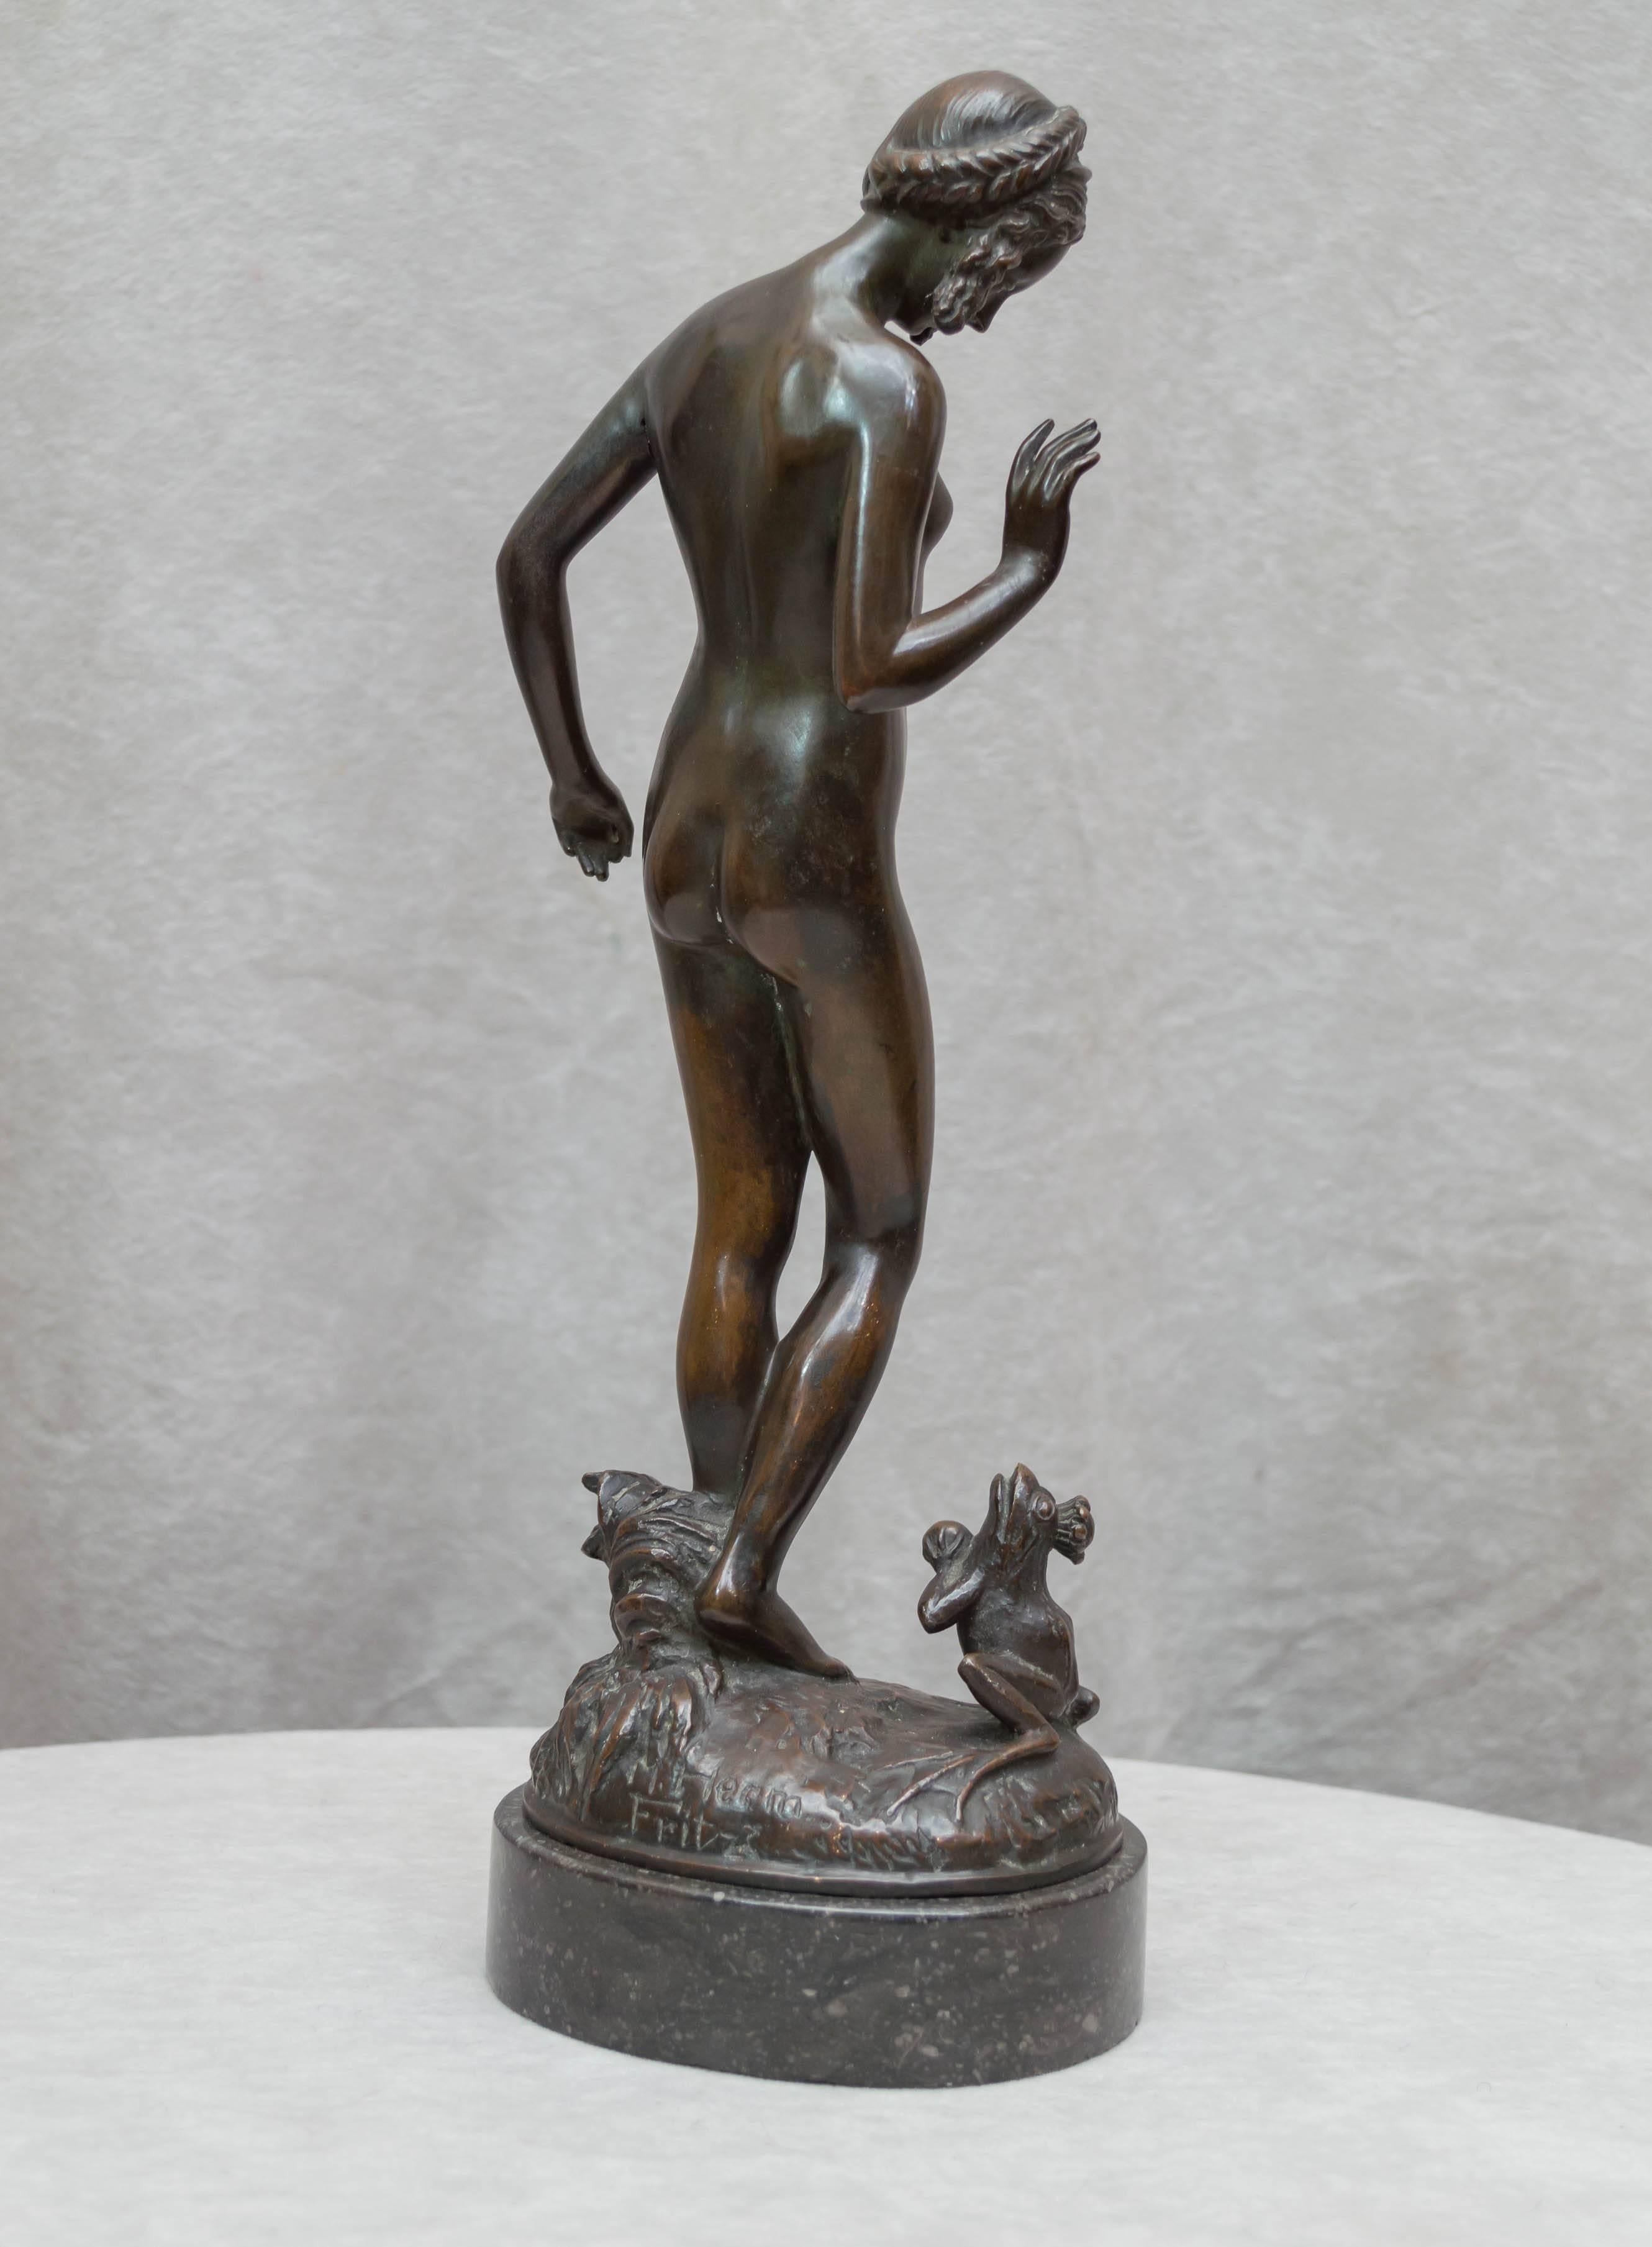 Bronze Allegorical Group of a Nude Maiden and a Frog Prince